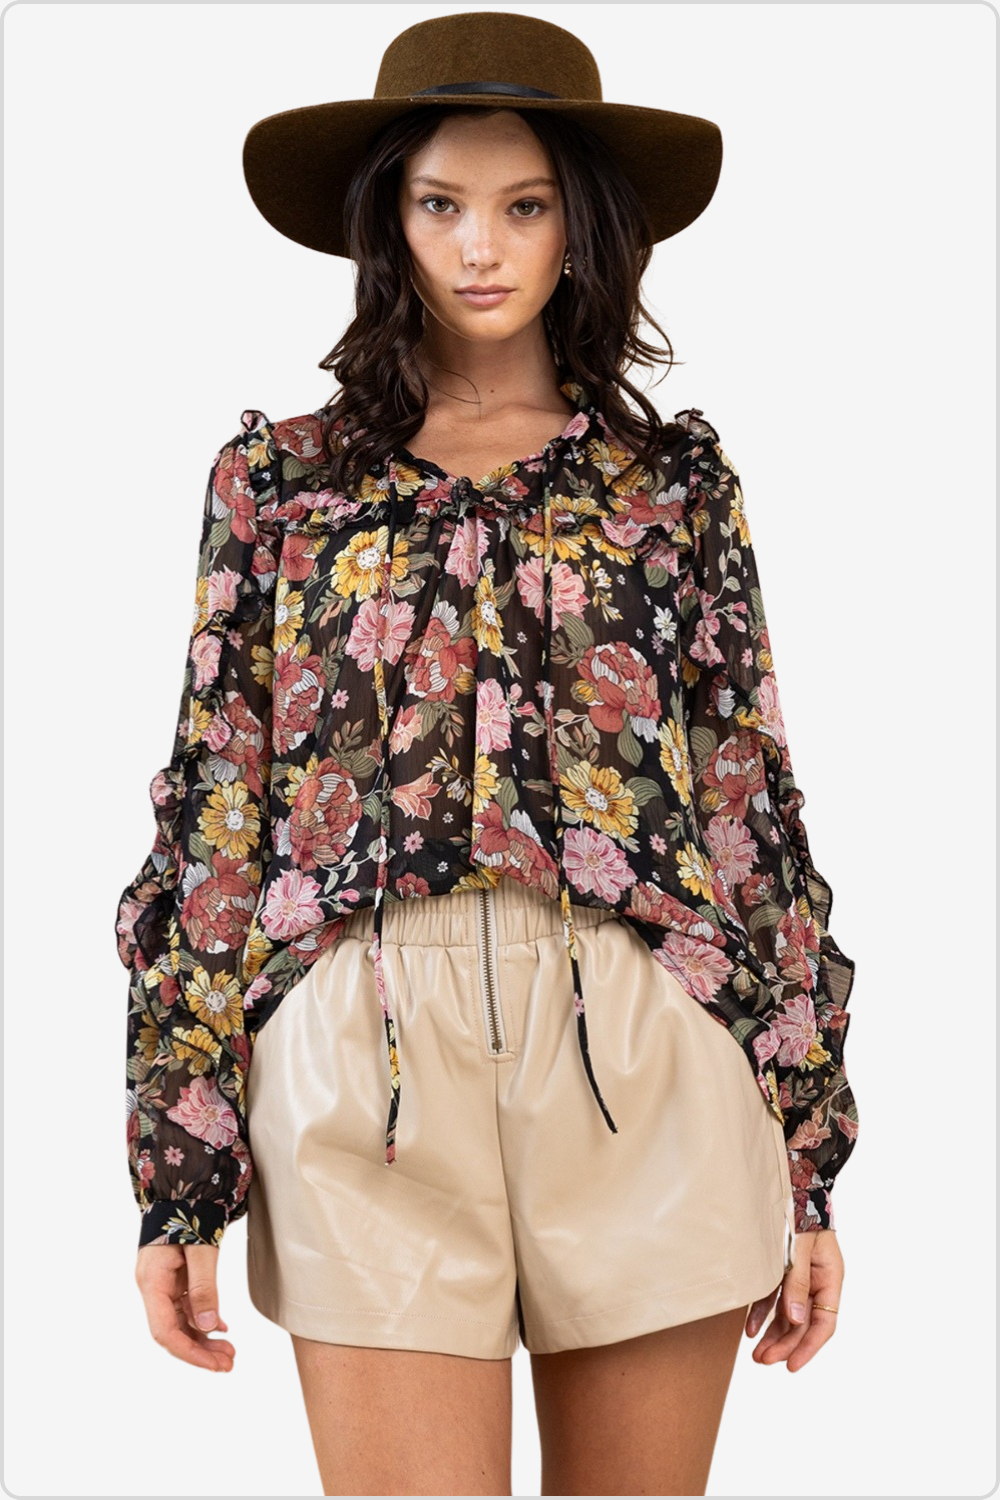 Elegant long sleeve floral blouse with ruffle trim, perfect for any occasion